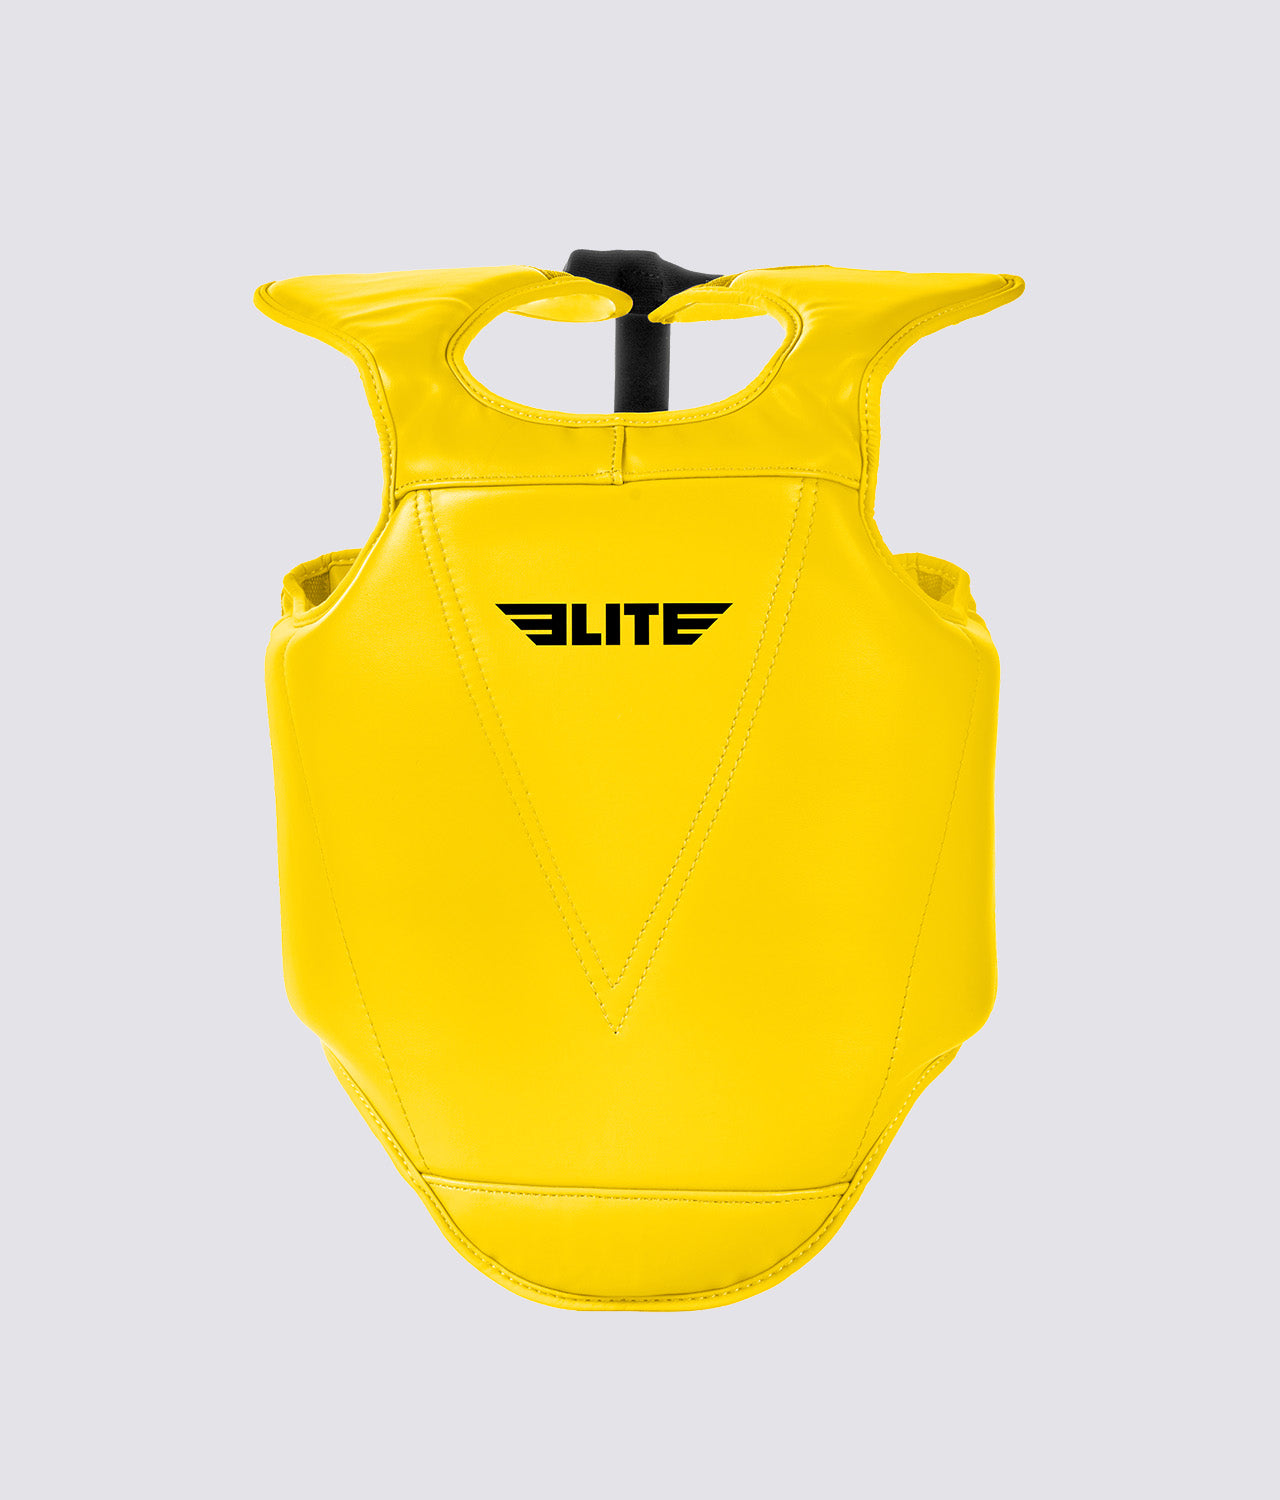 Elite Sports Kids' Yellow Boxing Chest Guard : 4 to 8 Years